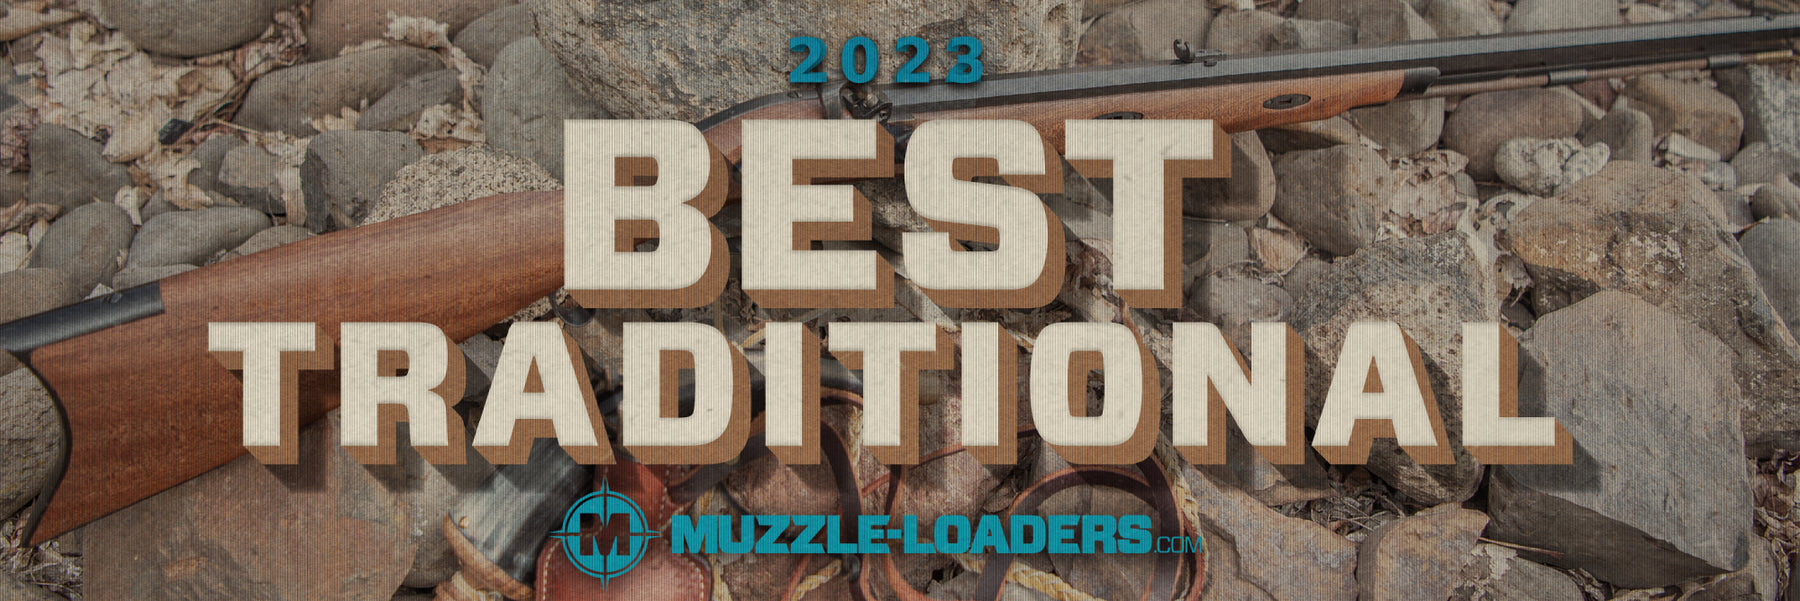 Historical Muzzle Loader Accessories: what are they and can I make